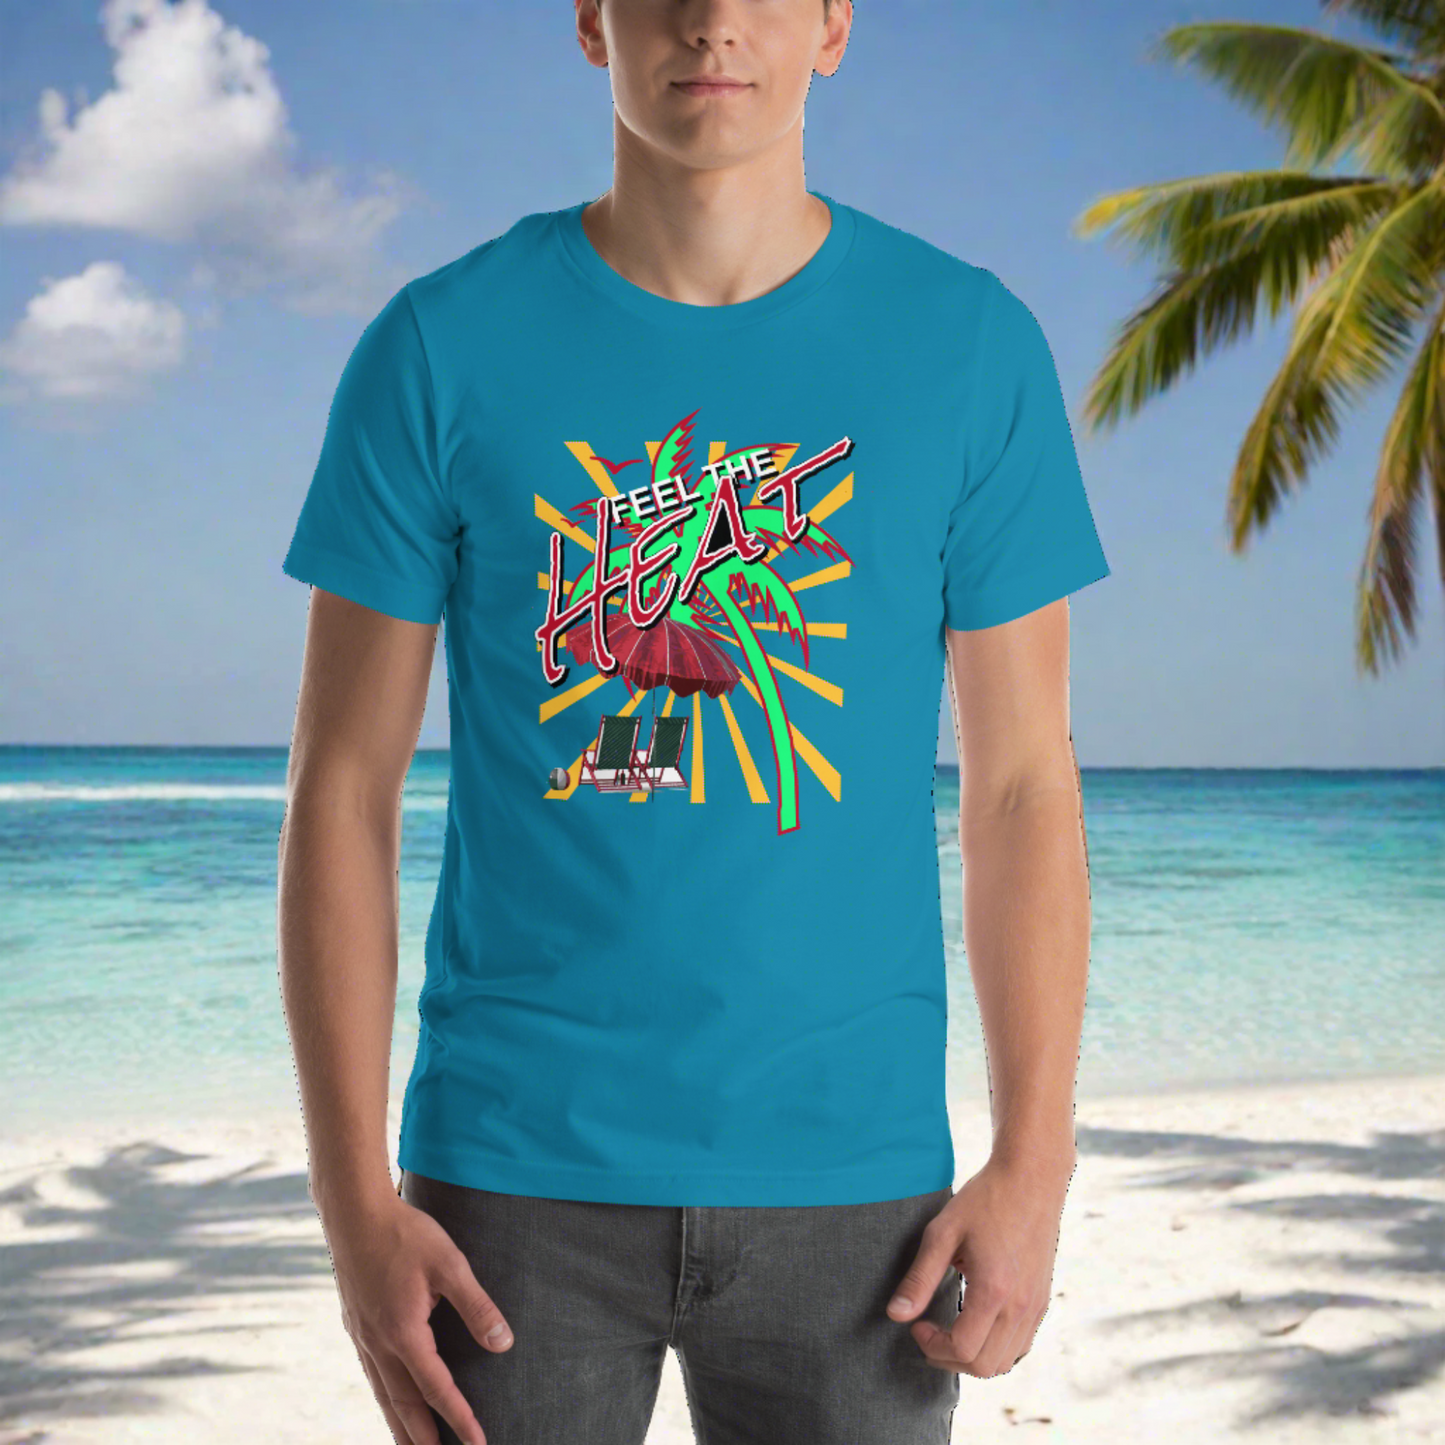 "Chill in Style: Ride the Waves with our Aqua 'Feel the Heat' Tee! 🏖️☀️ Get Yours at PuraFashions.com 🔥 #TropicVibes #BeachLife #SummerEssentials"